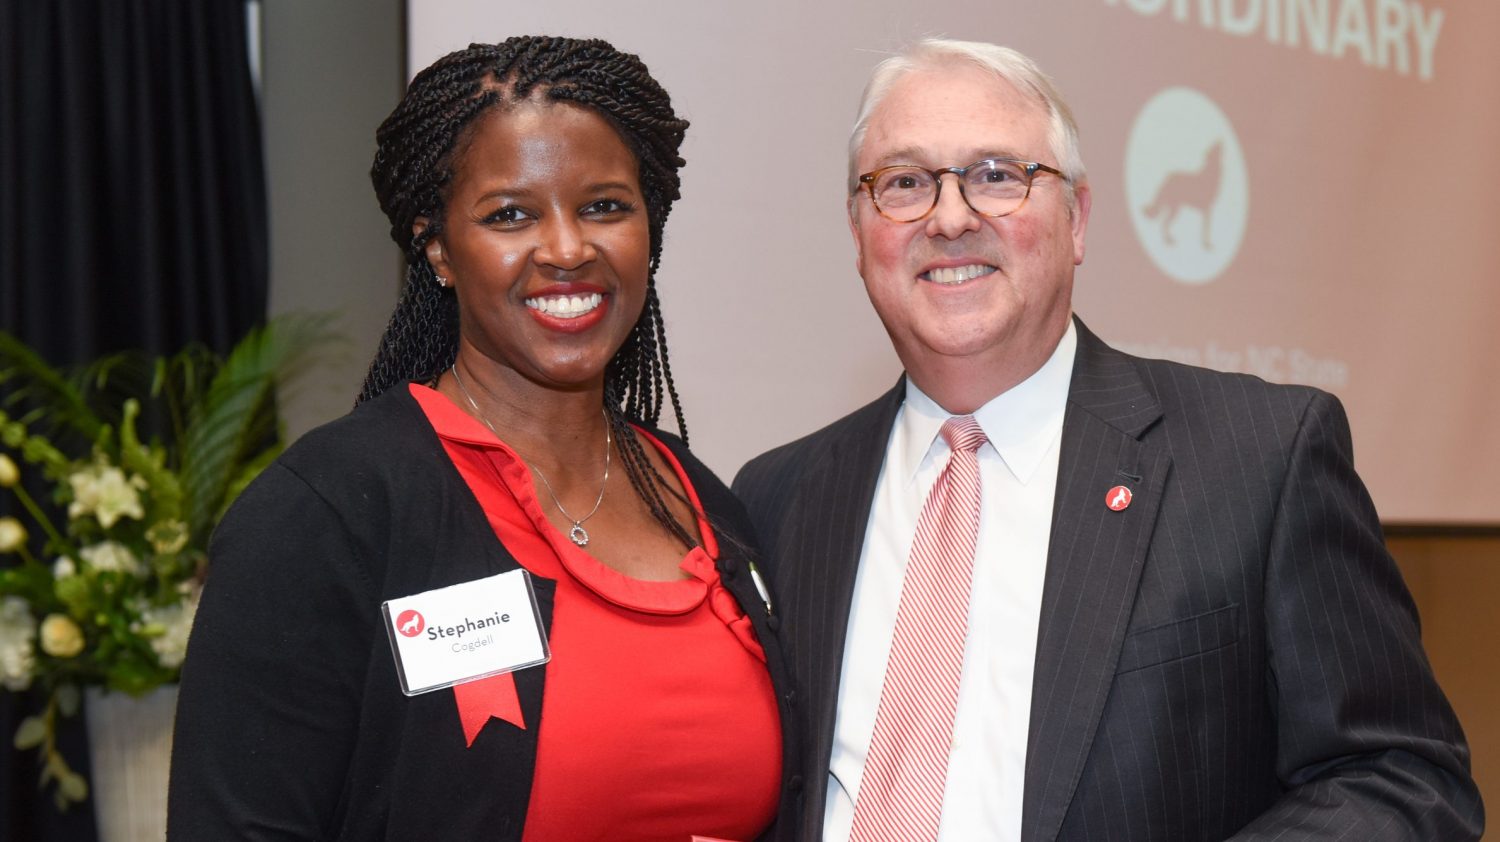 Stephanie Cogdell and Chancellor Woodson